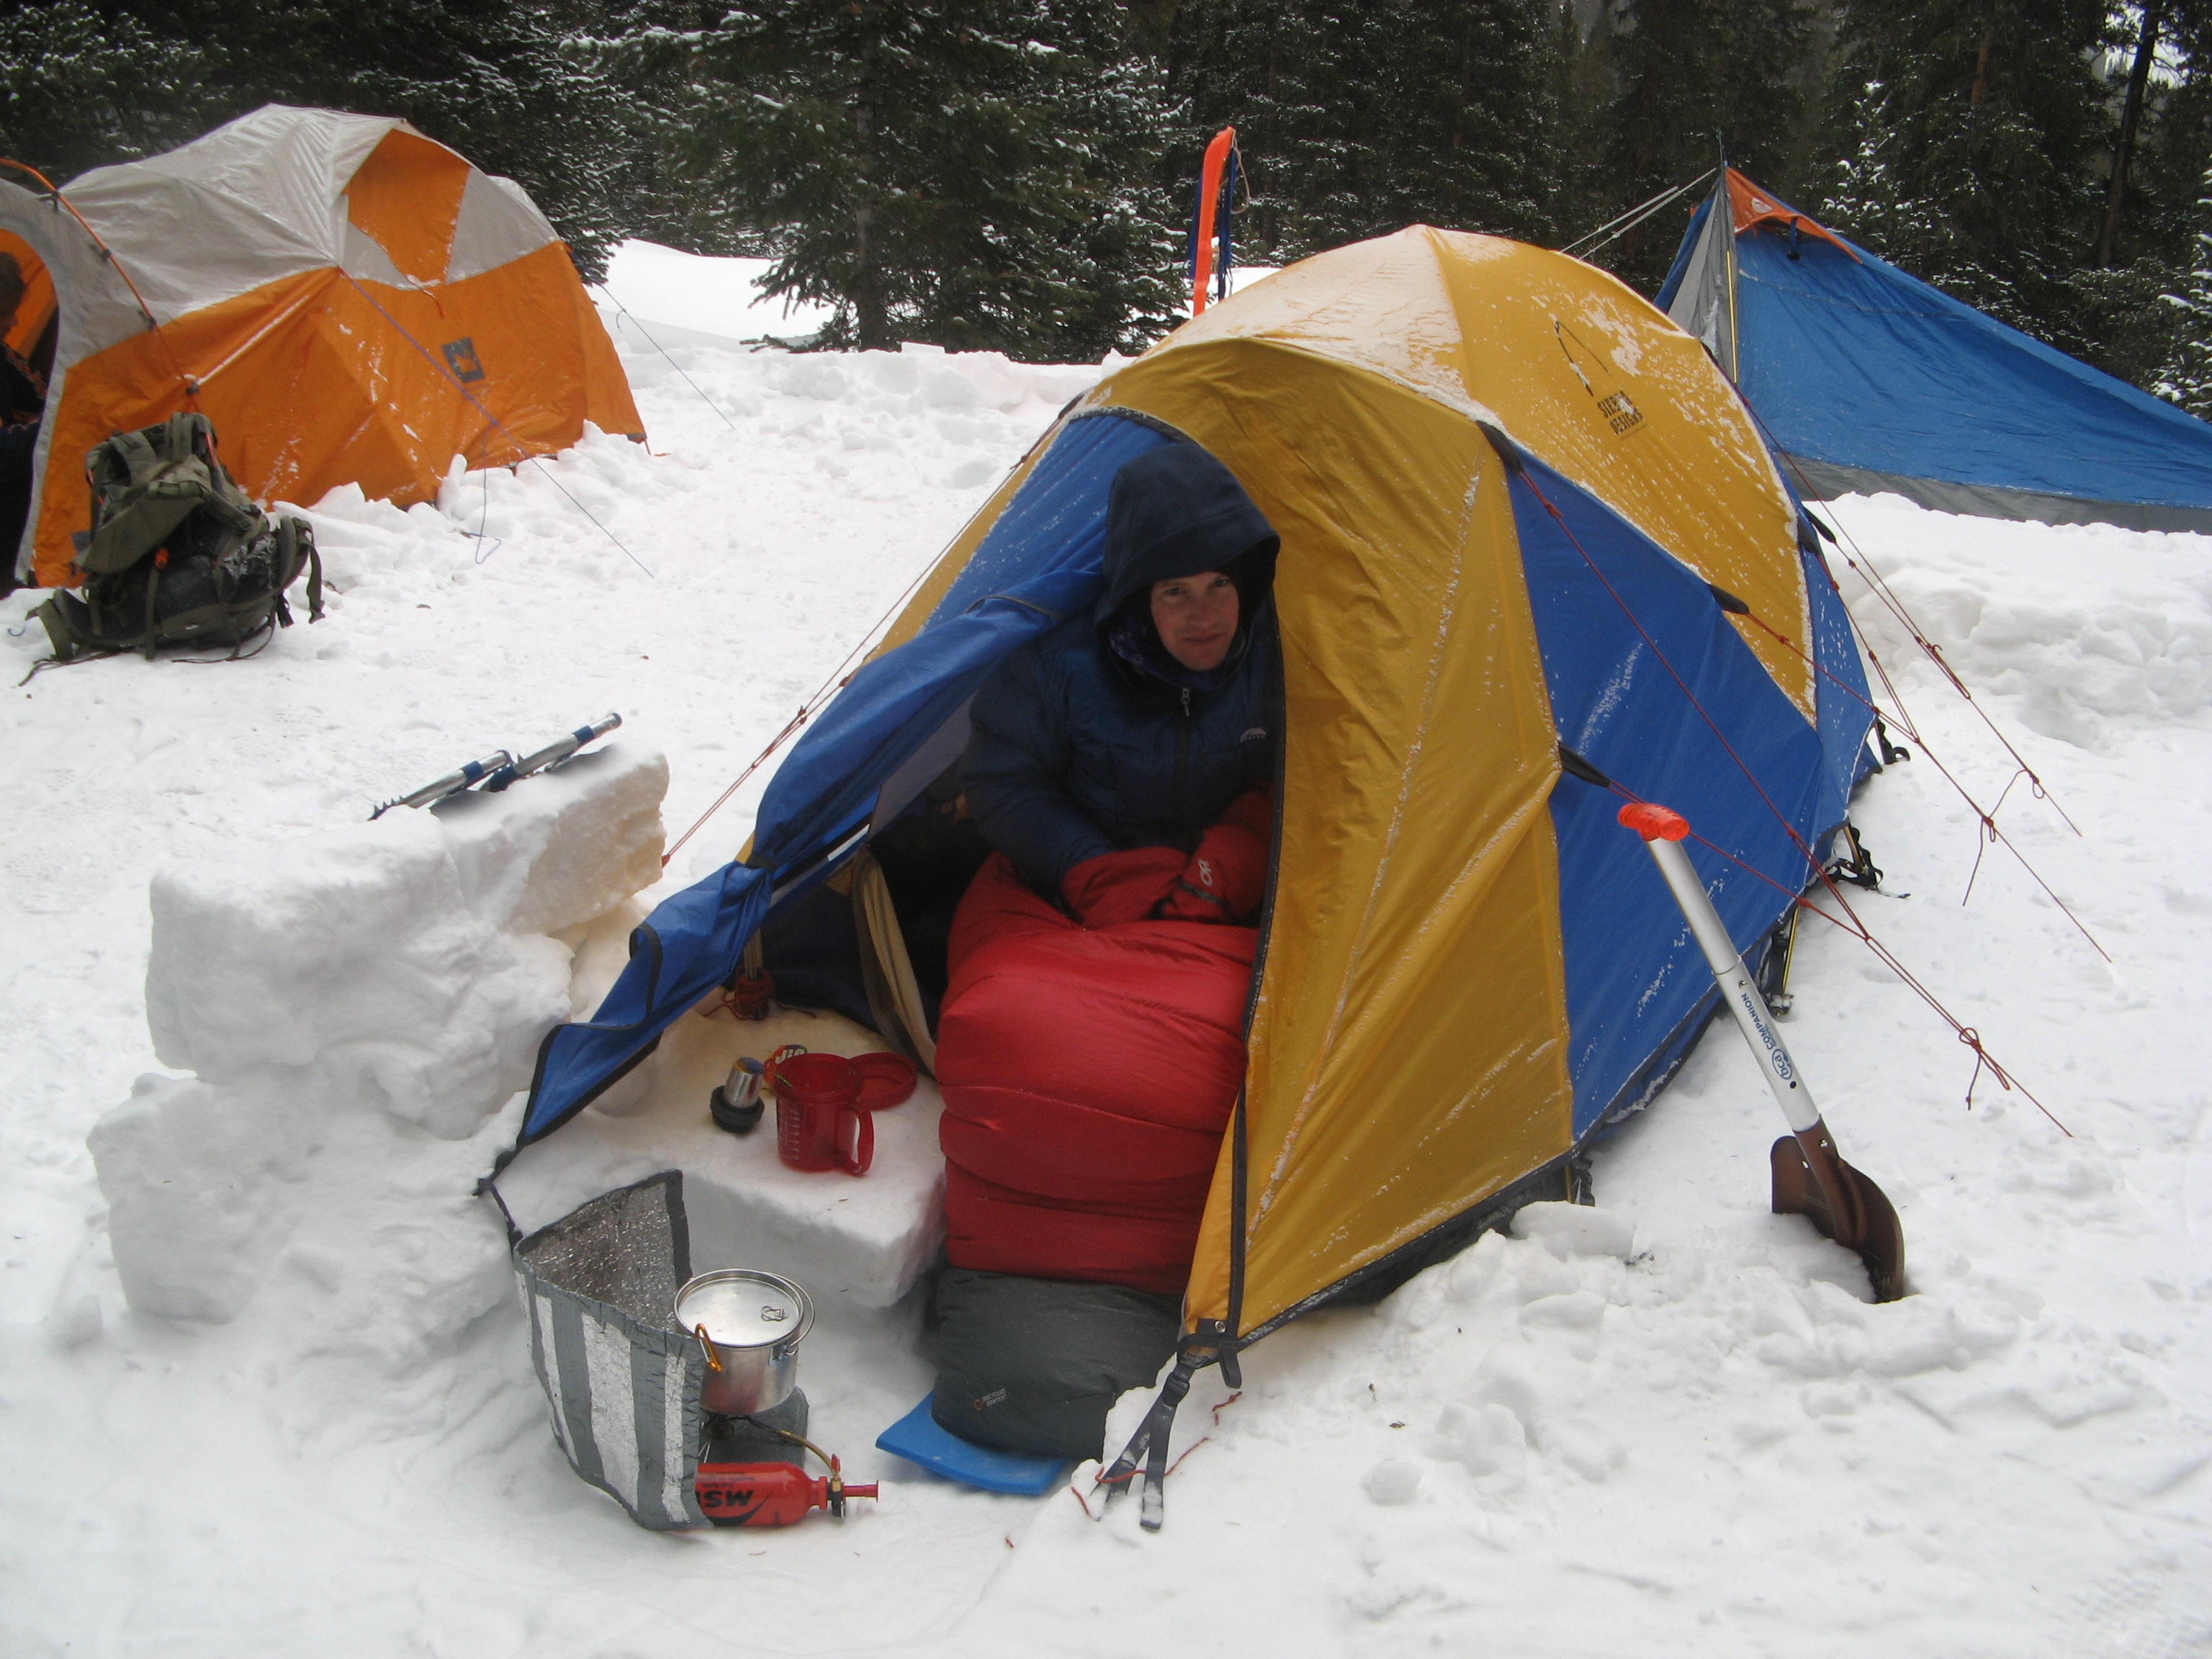 Welcome to Winter Camping School